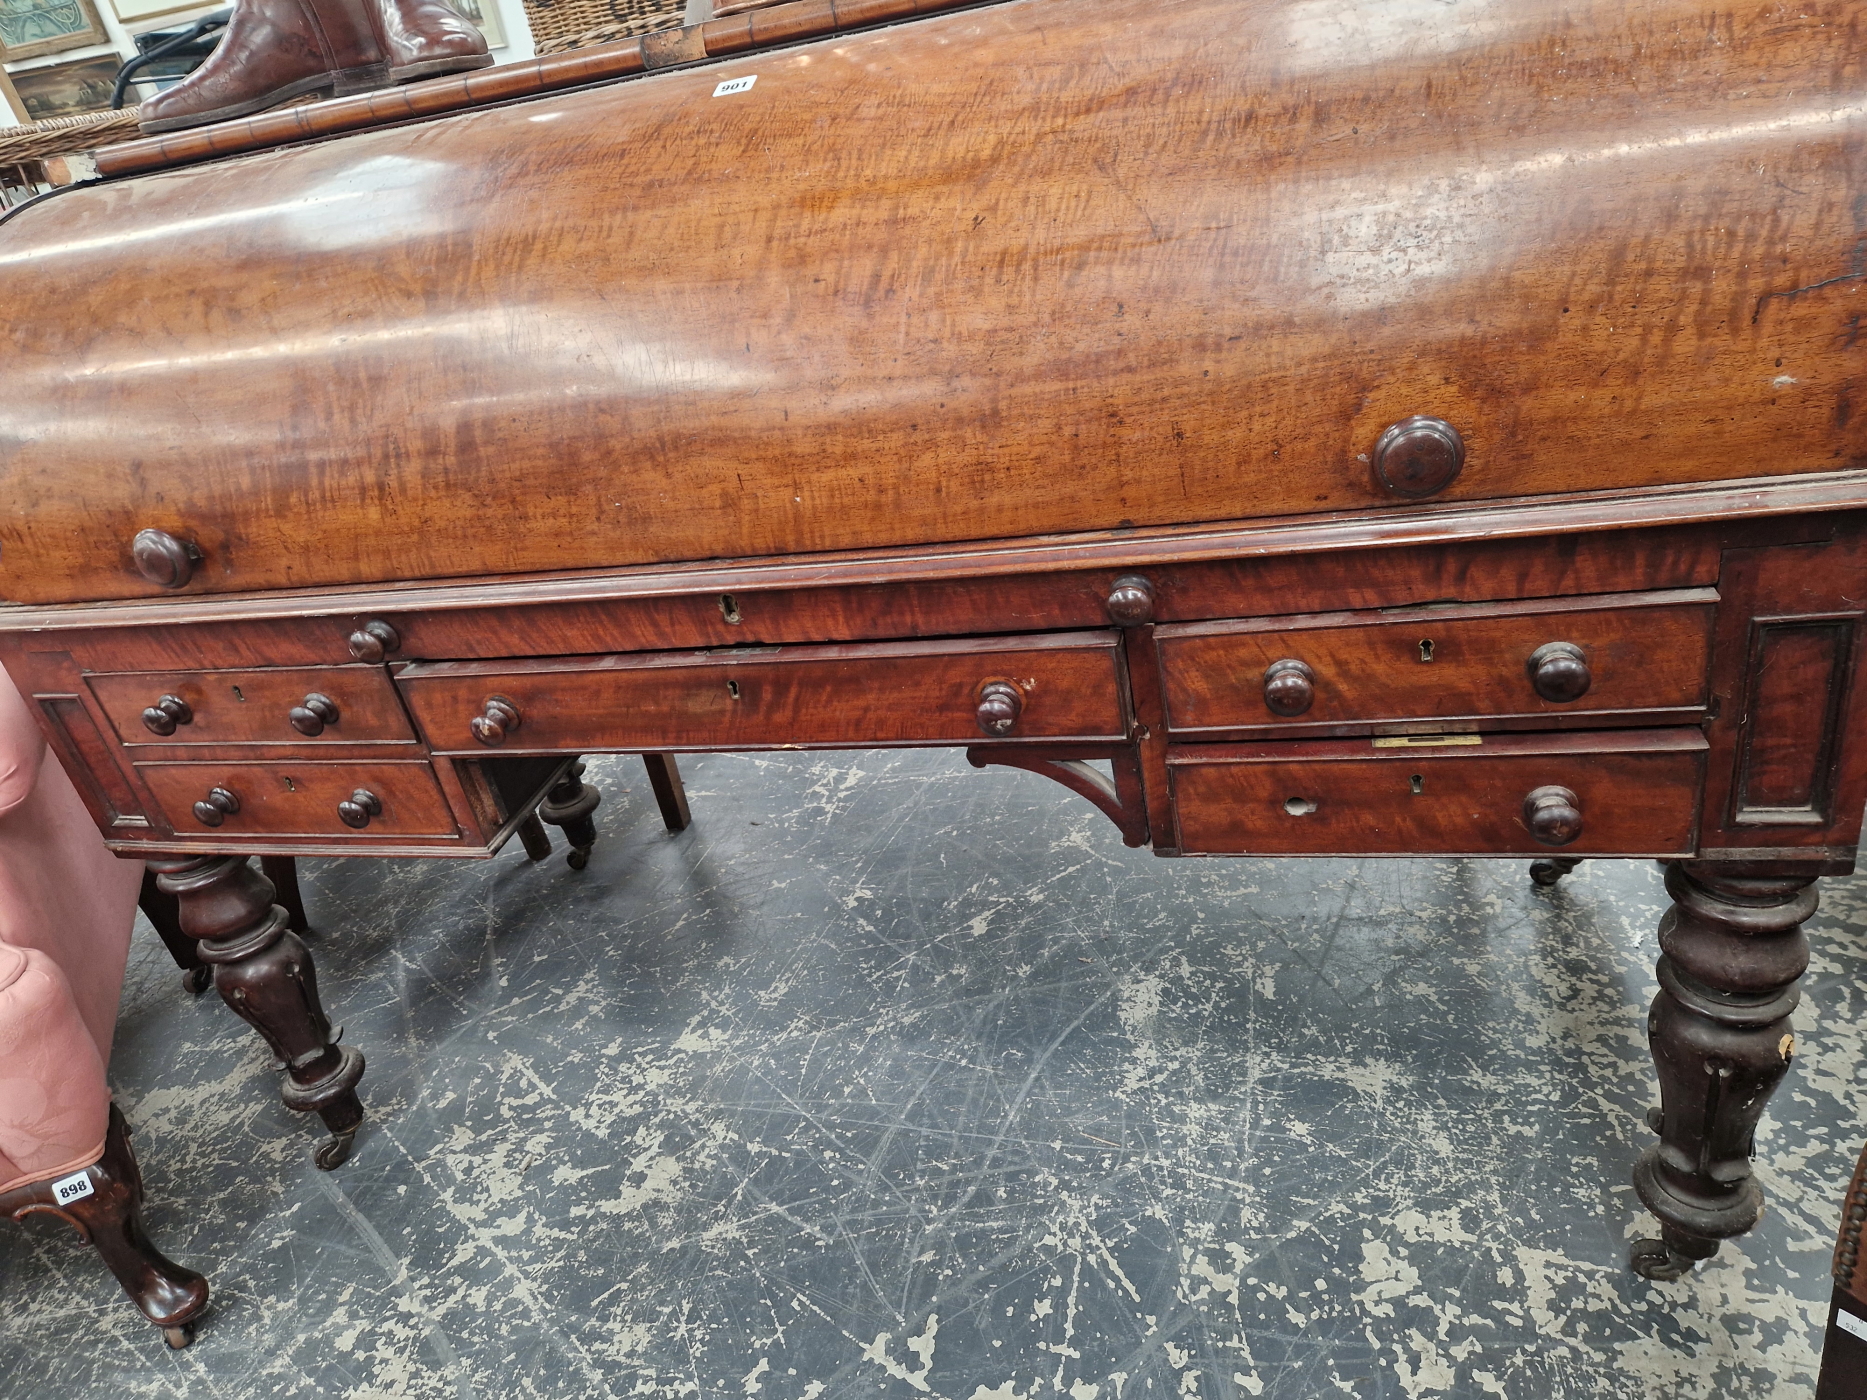 A 19th C. MAHOGANY ROLL TOP DESK WITH A CONFIGURATION OF FIVE DRAWERS ABOVE THE CYLINDRICAL LEGS - Image 2 of 9